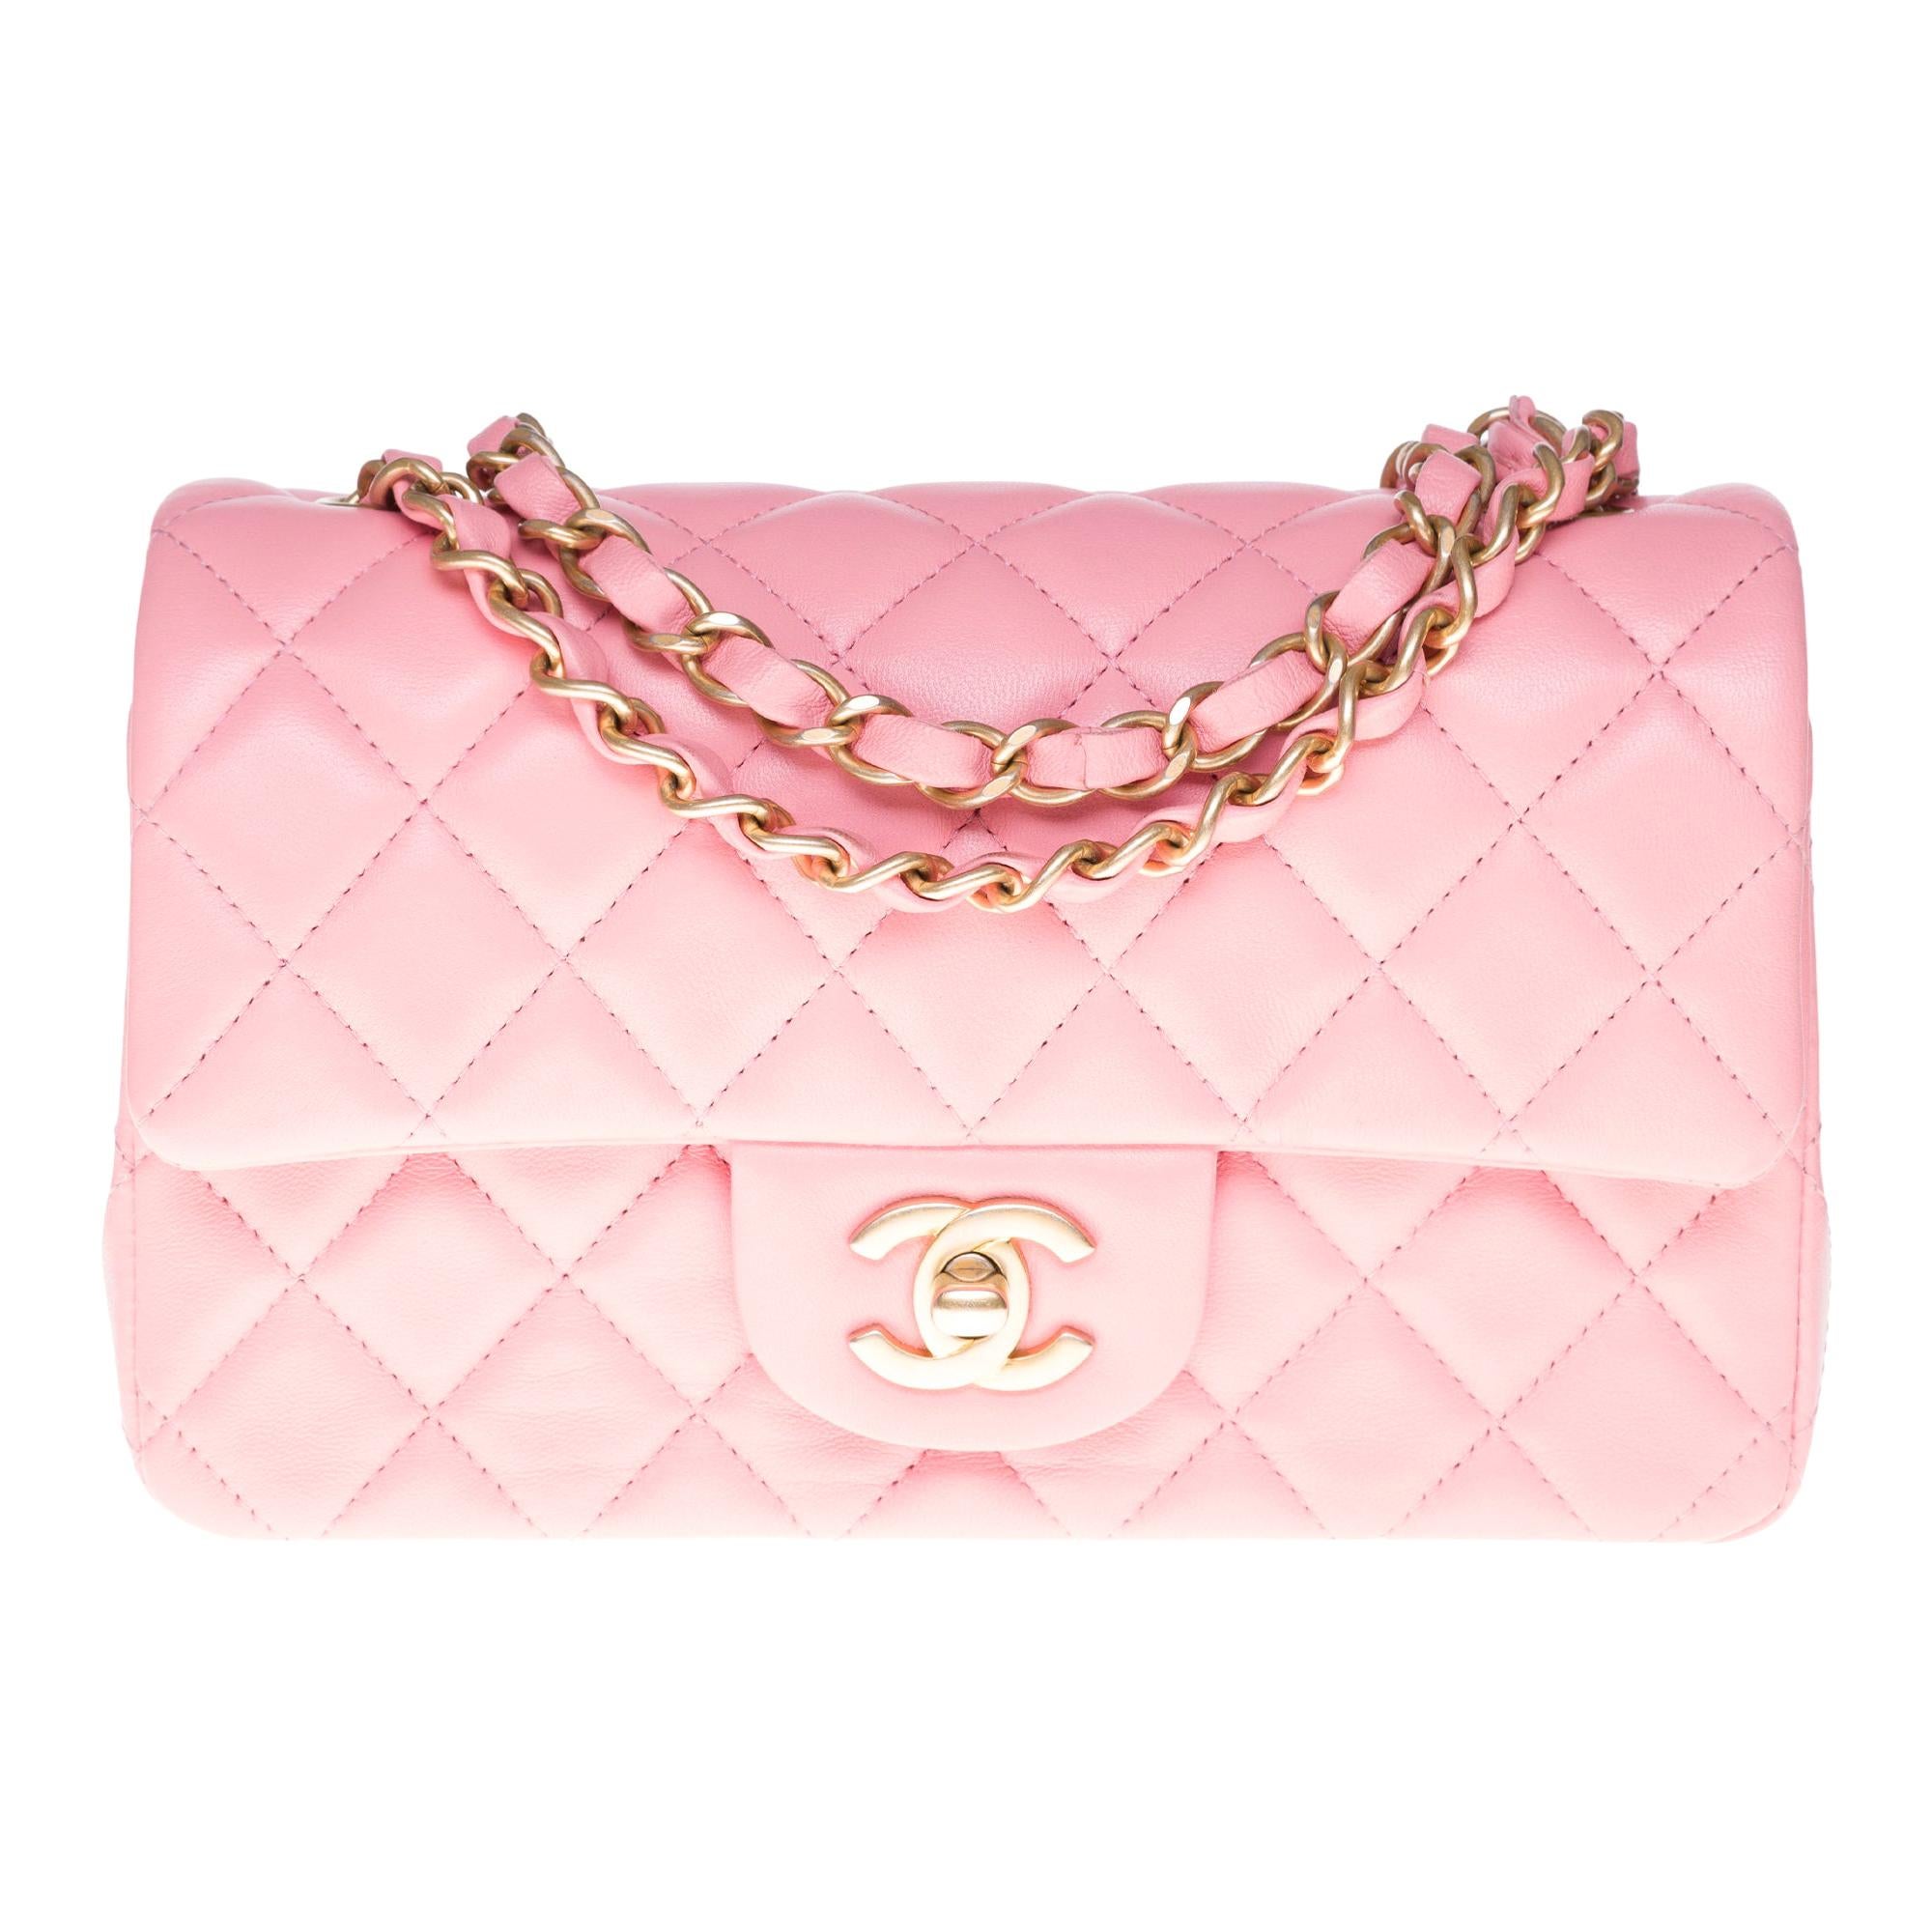 Chanel Mini Timeless Shoulder bag in Pink quilted leather and gold hardware